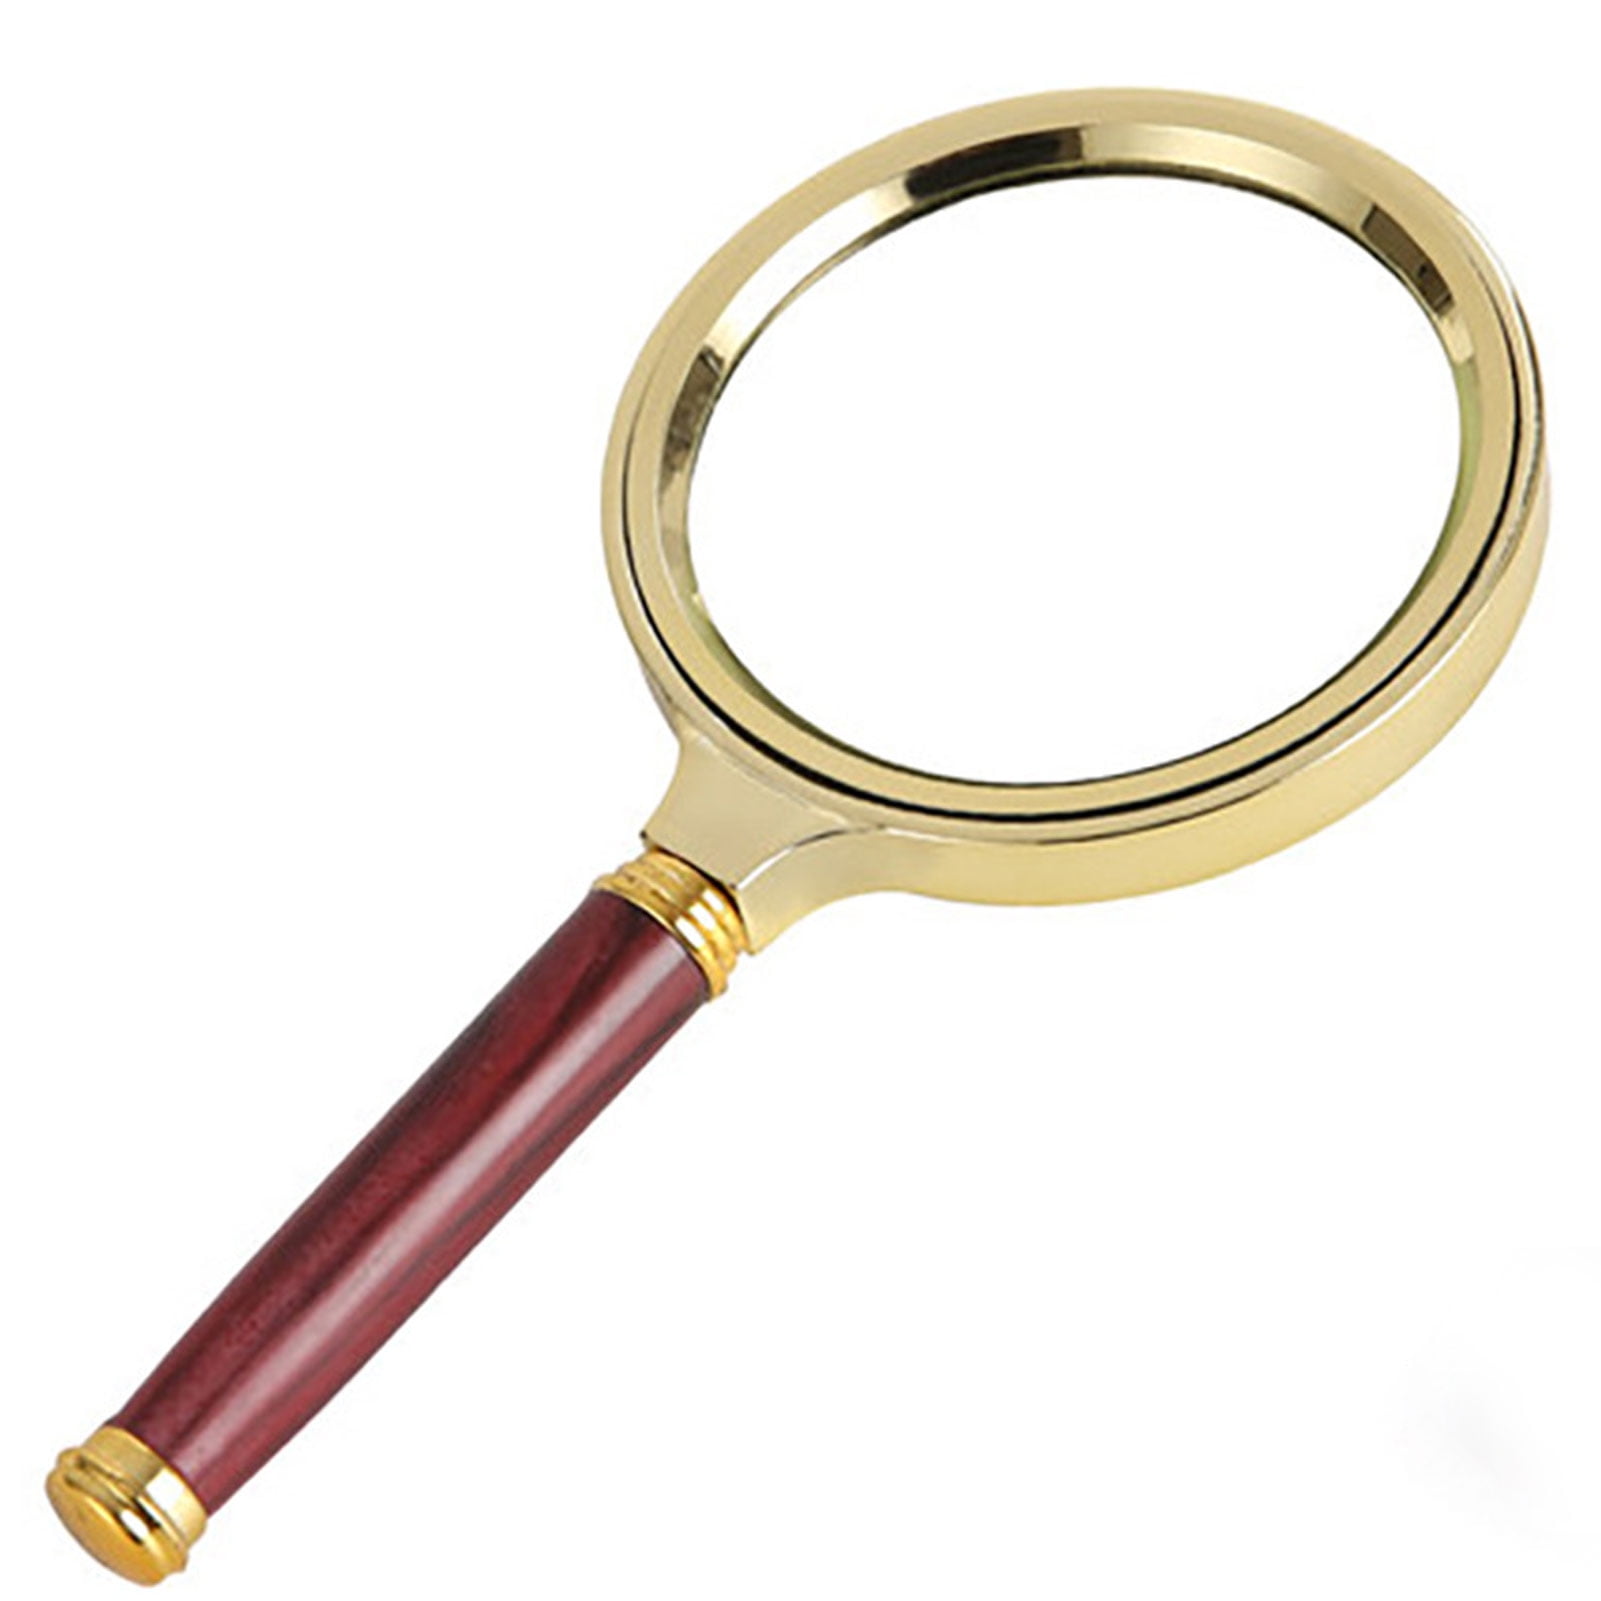 Retro Handle Magnifier Magnifying Glass Antique Brass Glass Lens Handheld